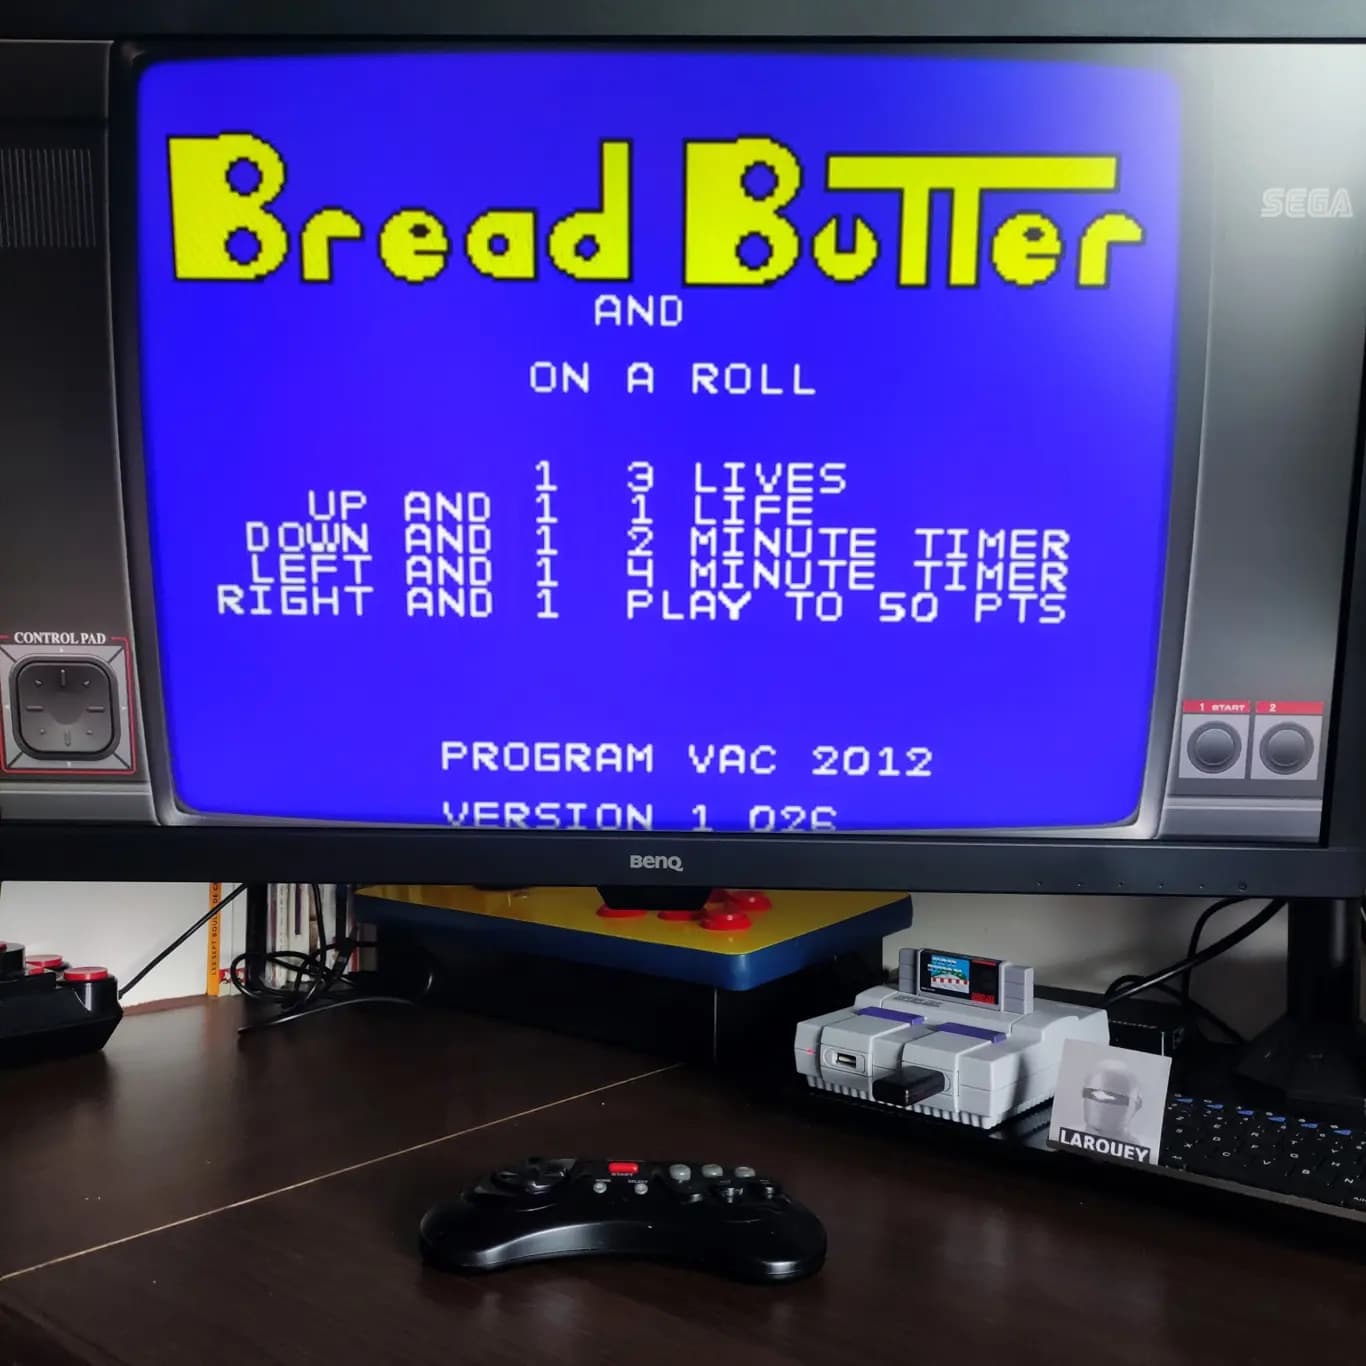 Larquey: Bread and Butter (Sega Master System Emulated) 11 points on 2022-08-09 00:29:05